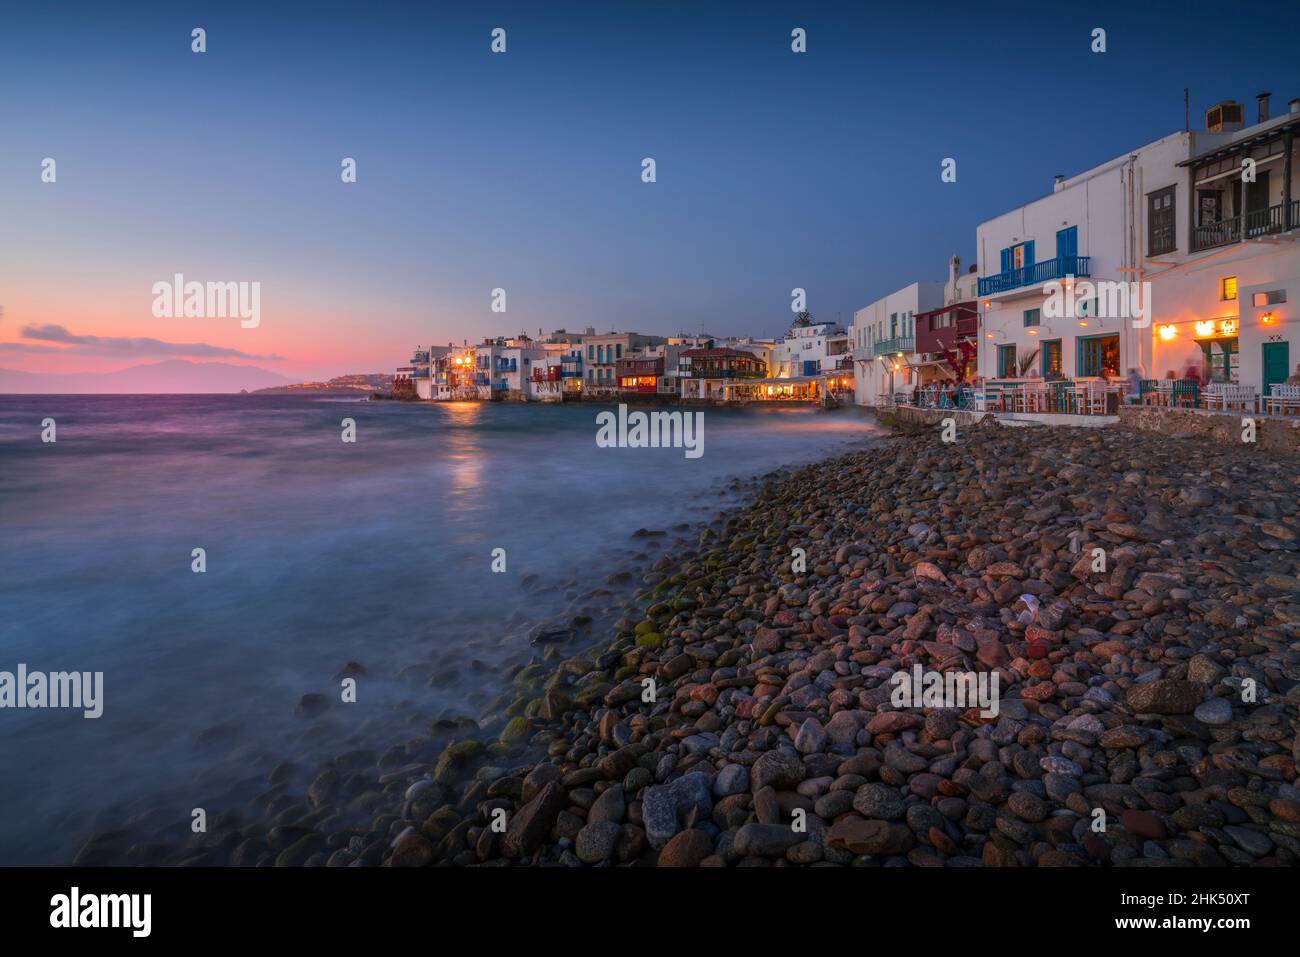 View of restaurants and pebble beach at Little Venice in Mykonos Town at night, Mykonos, Cyclades Islands, Greek Islands, Aegean Sea, Greece, Europe Stock Photo